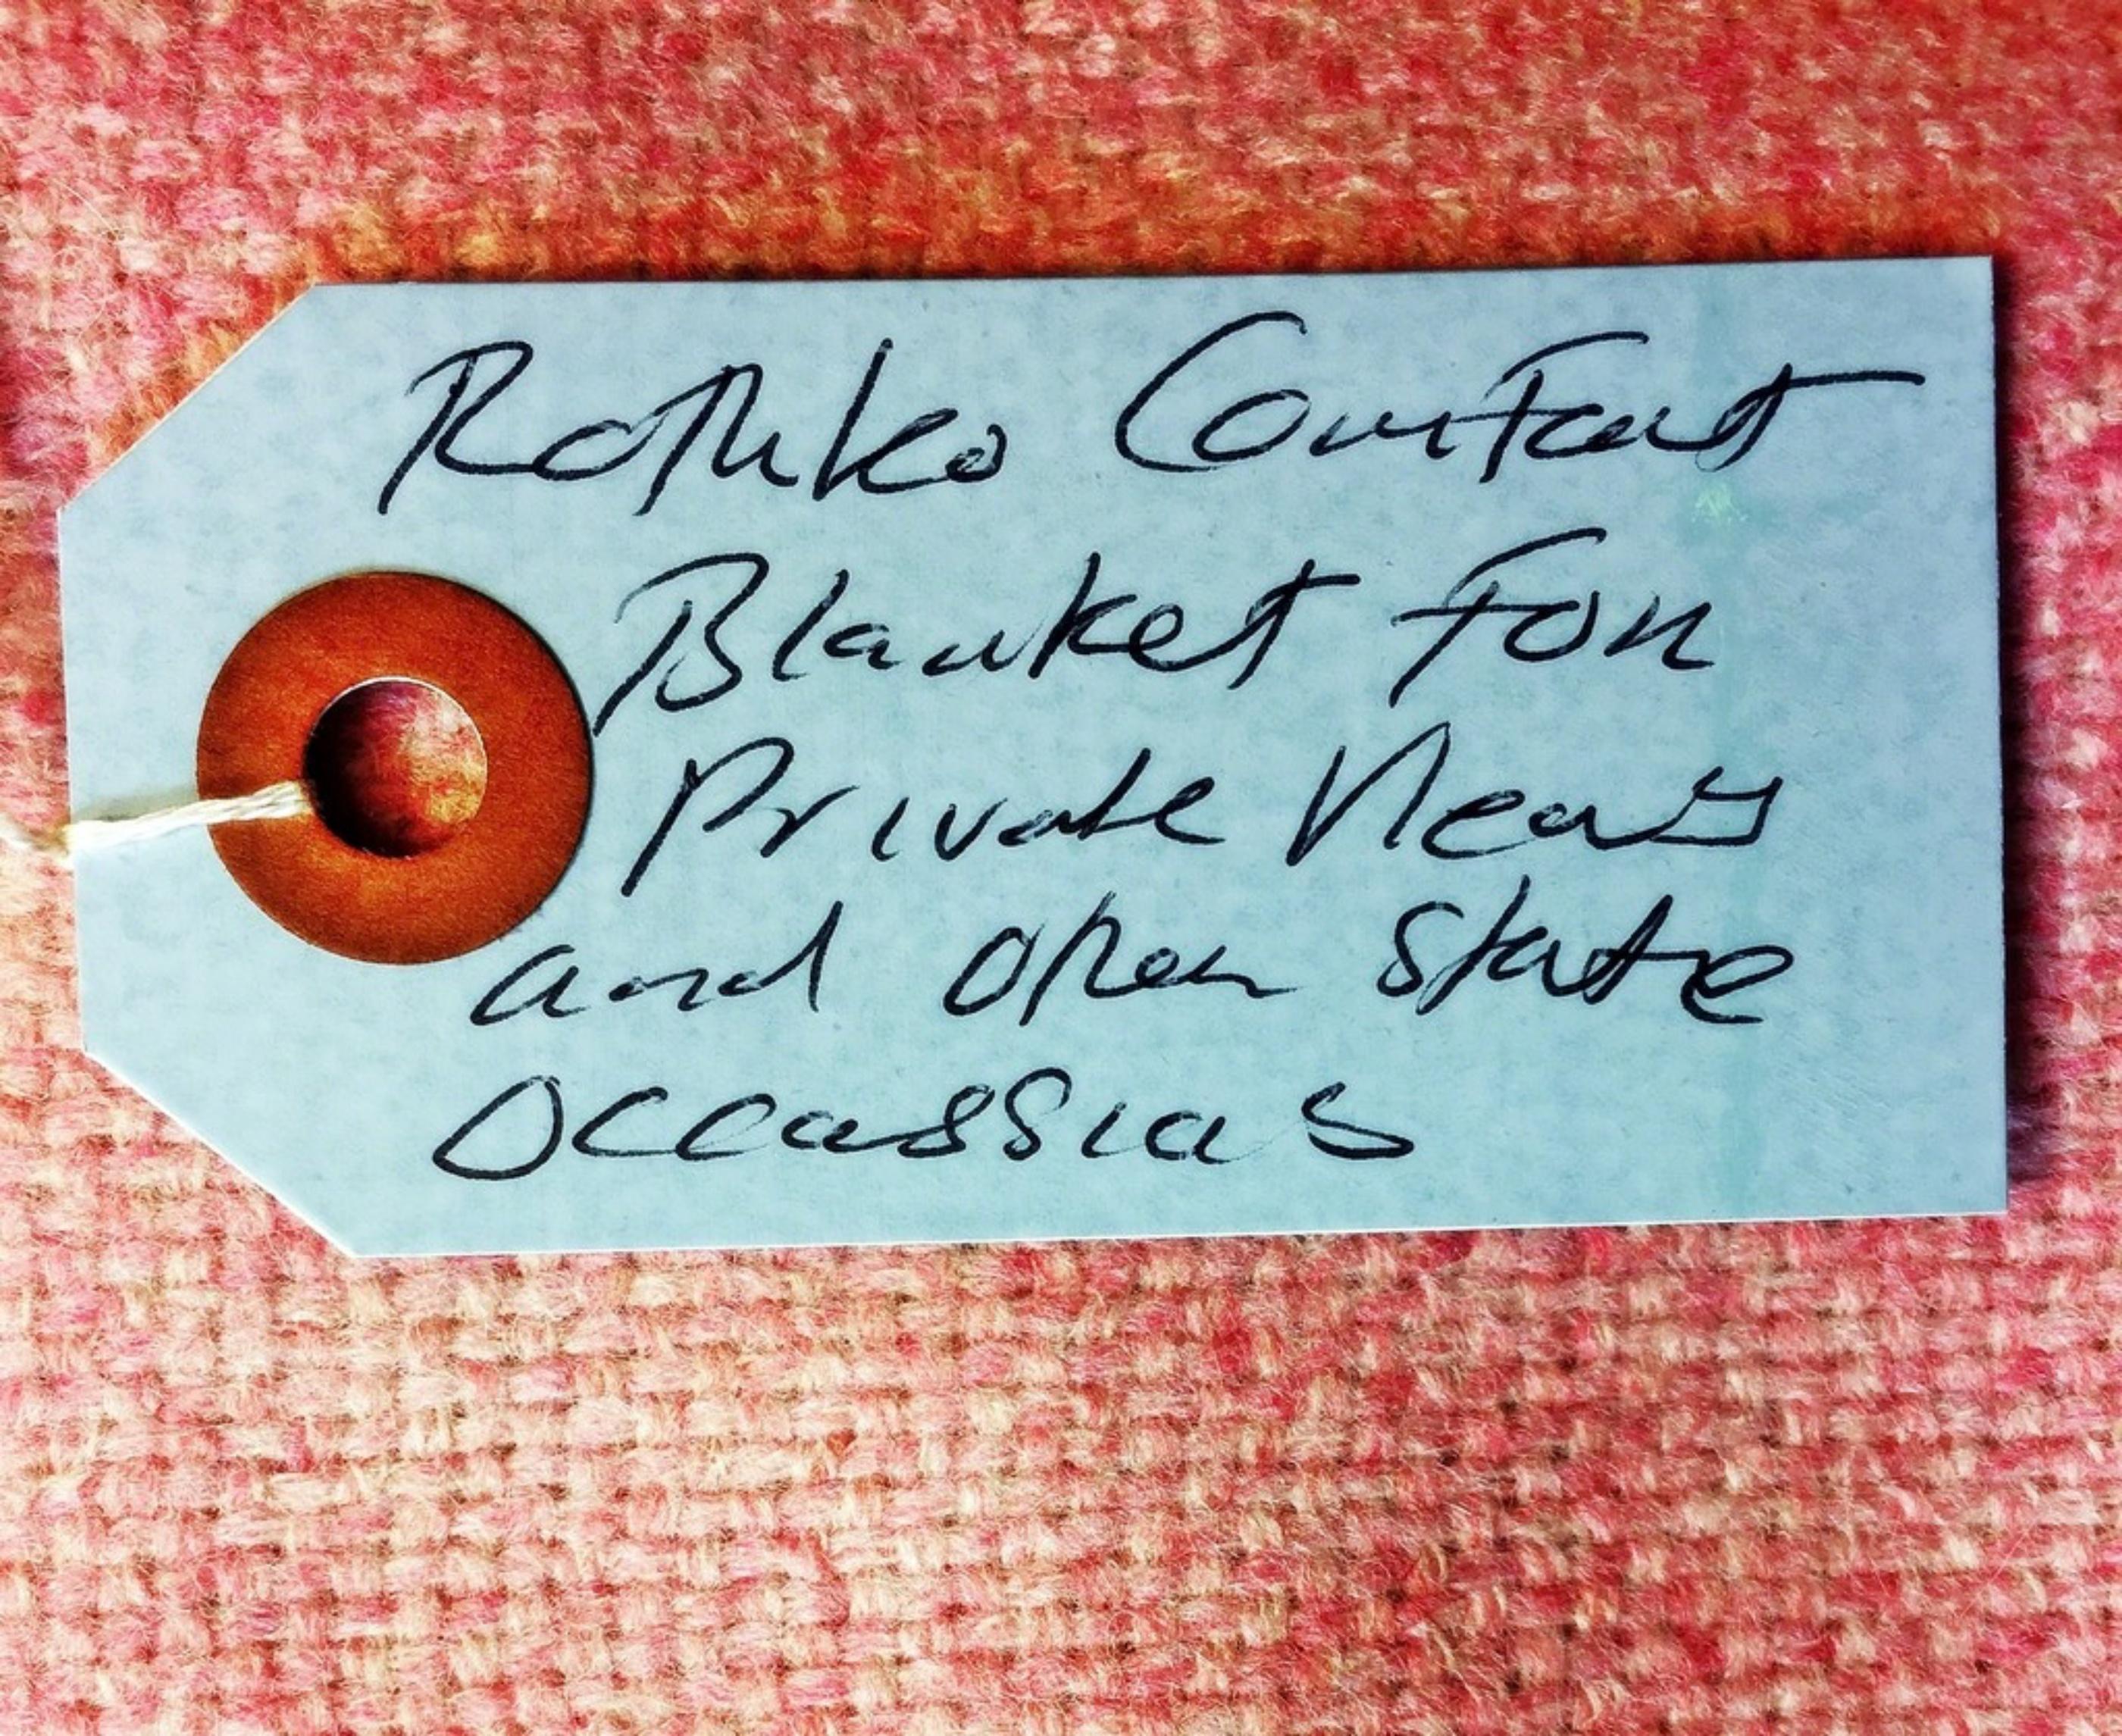 Rothko Comfort Blanket (limited edition textile with hand signed tag with label) - Print by Tracey Emin